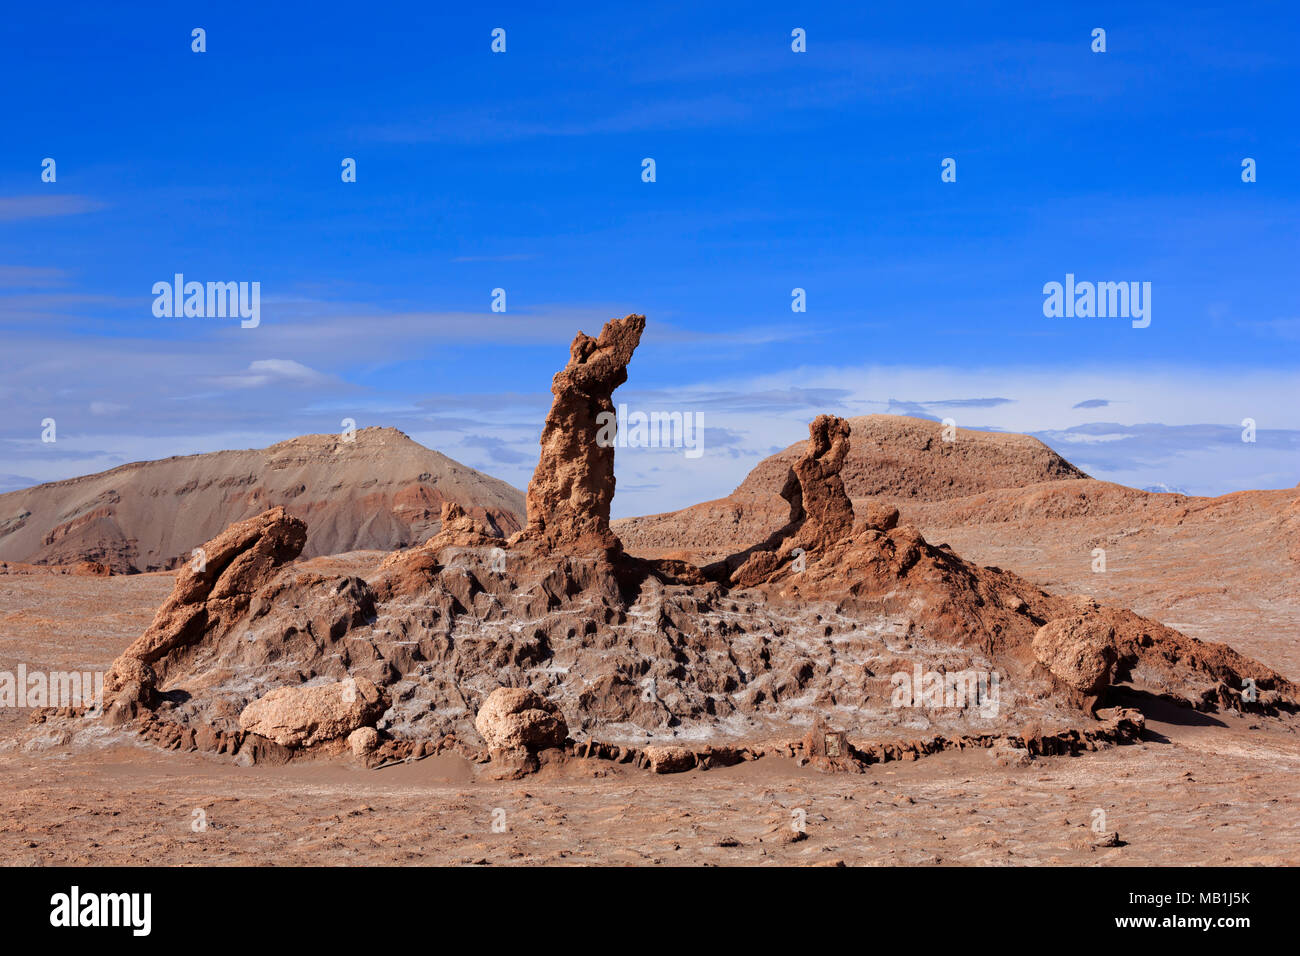 Tres Marias rock formation, Valle de la Luna, Atacama Desert, Chile. This image has been digitially manipulated to remove an unsightly sign. Stock Photo